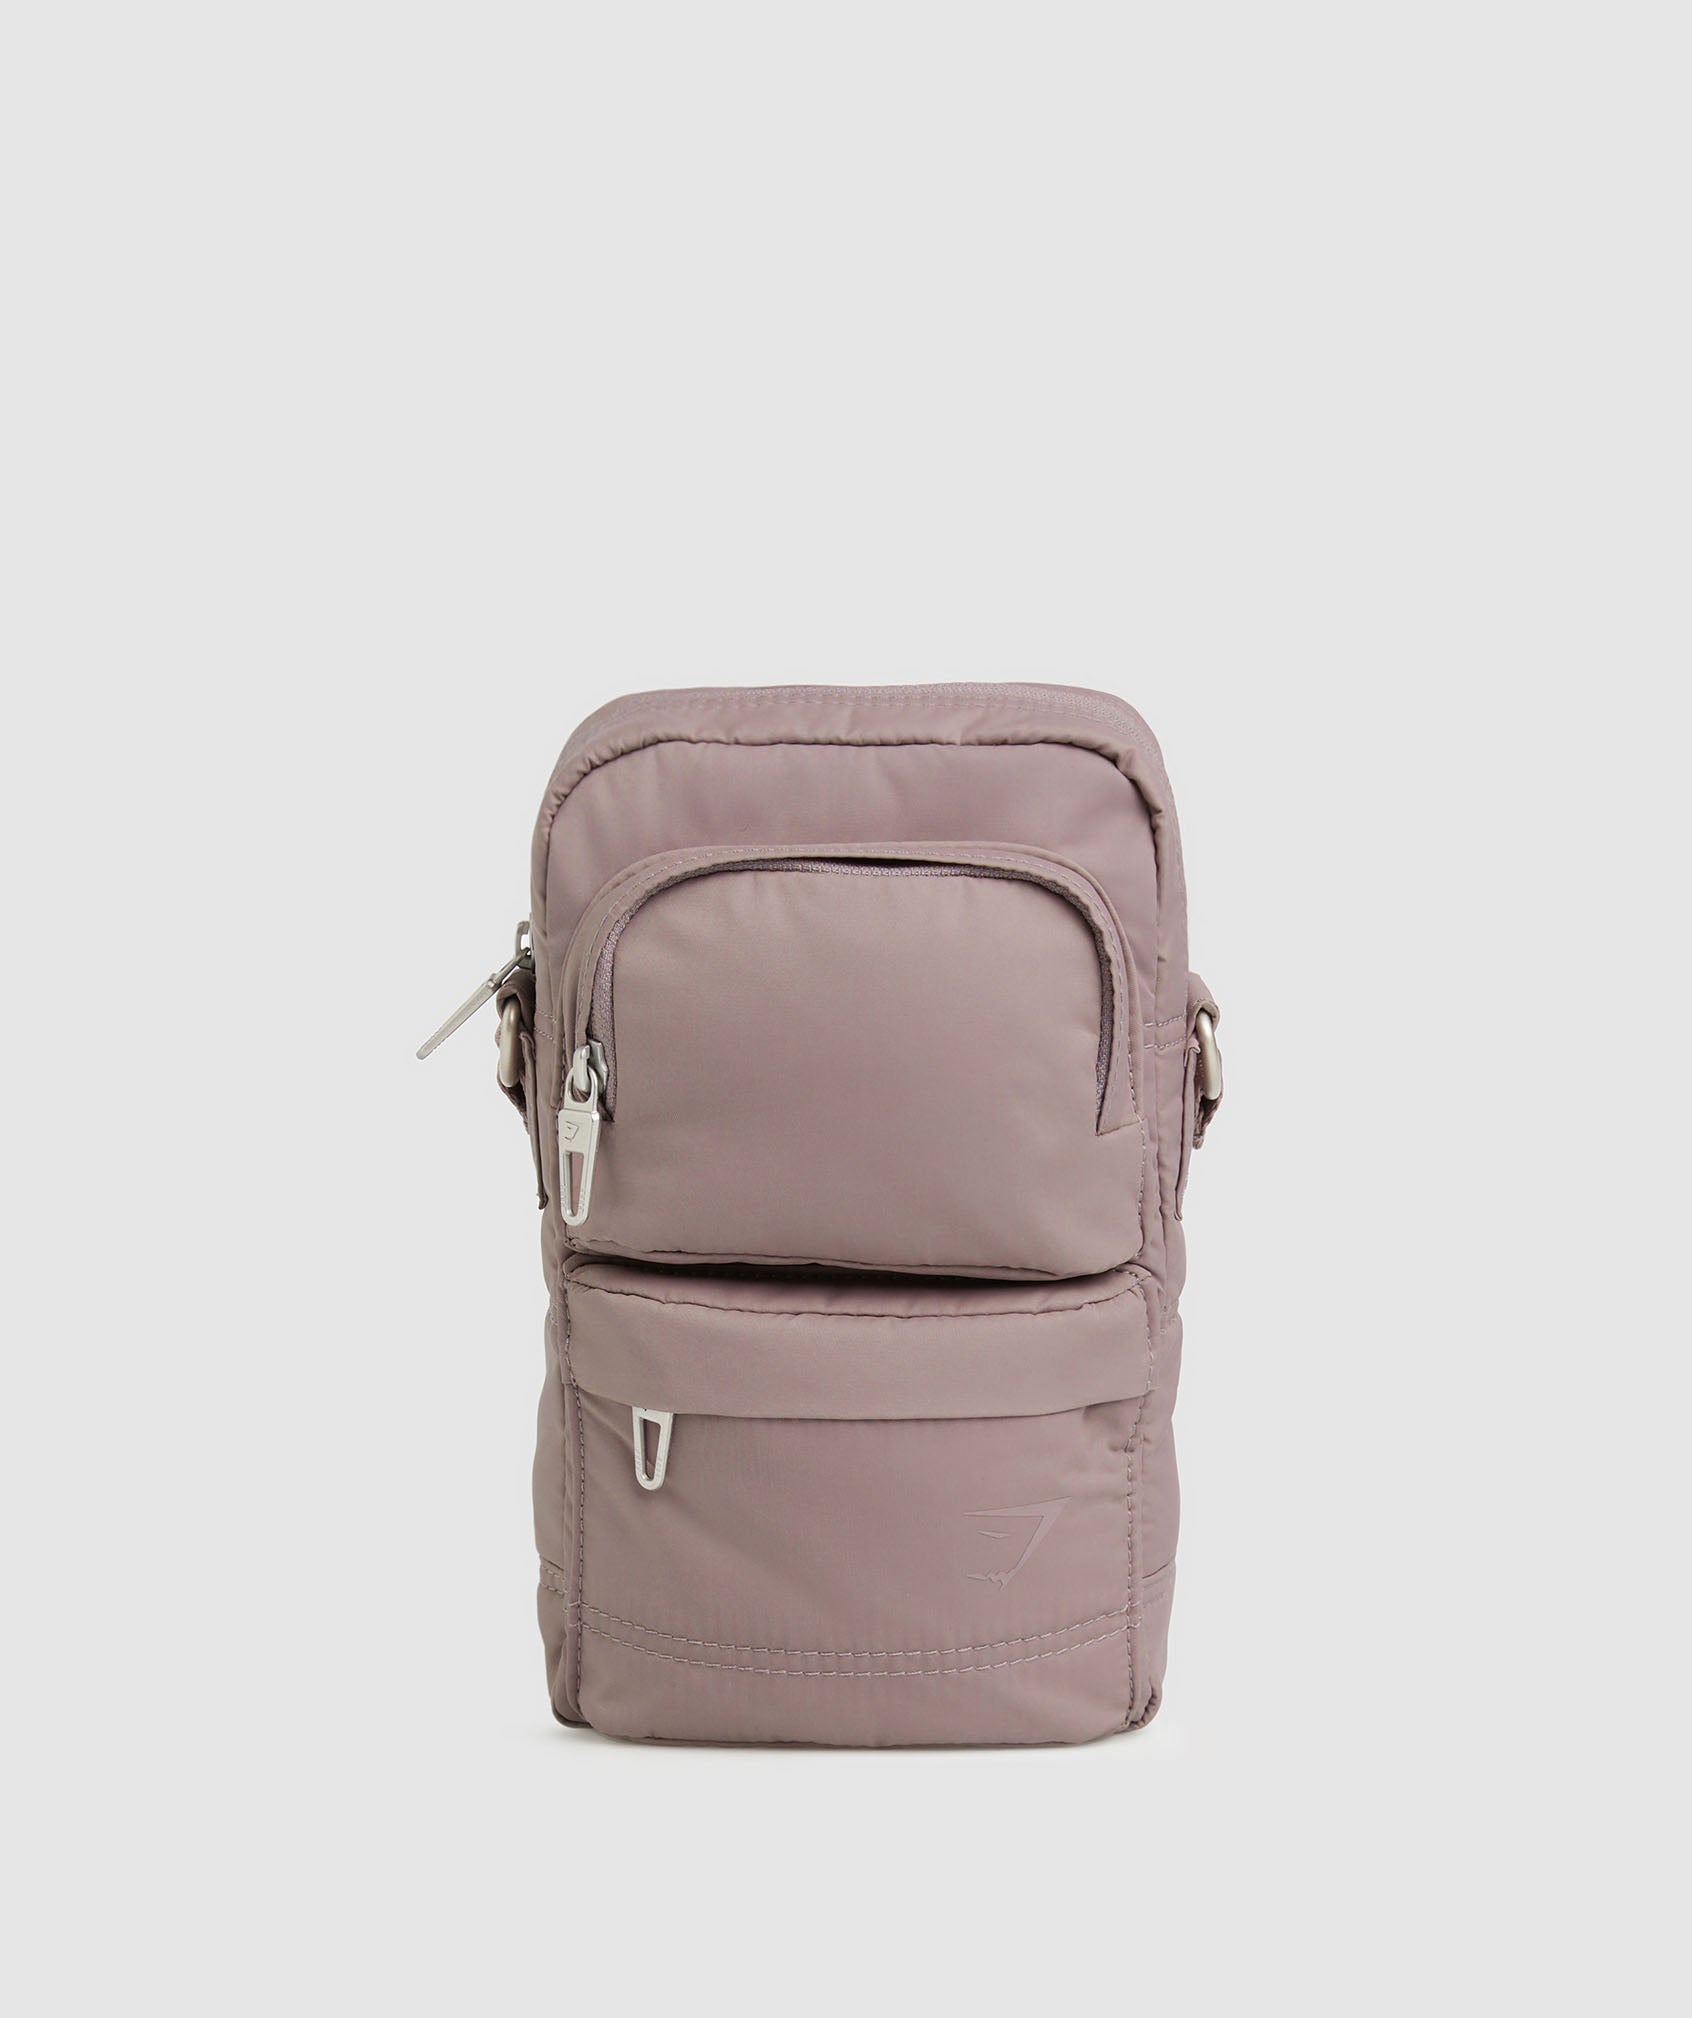 Premium Lifestyle Cross Body in Washed Mauve - view 1